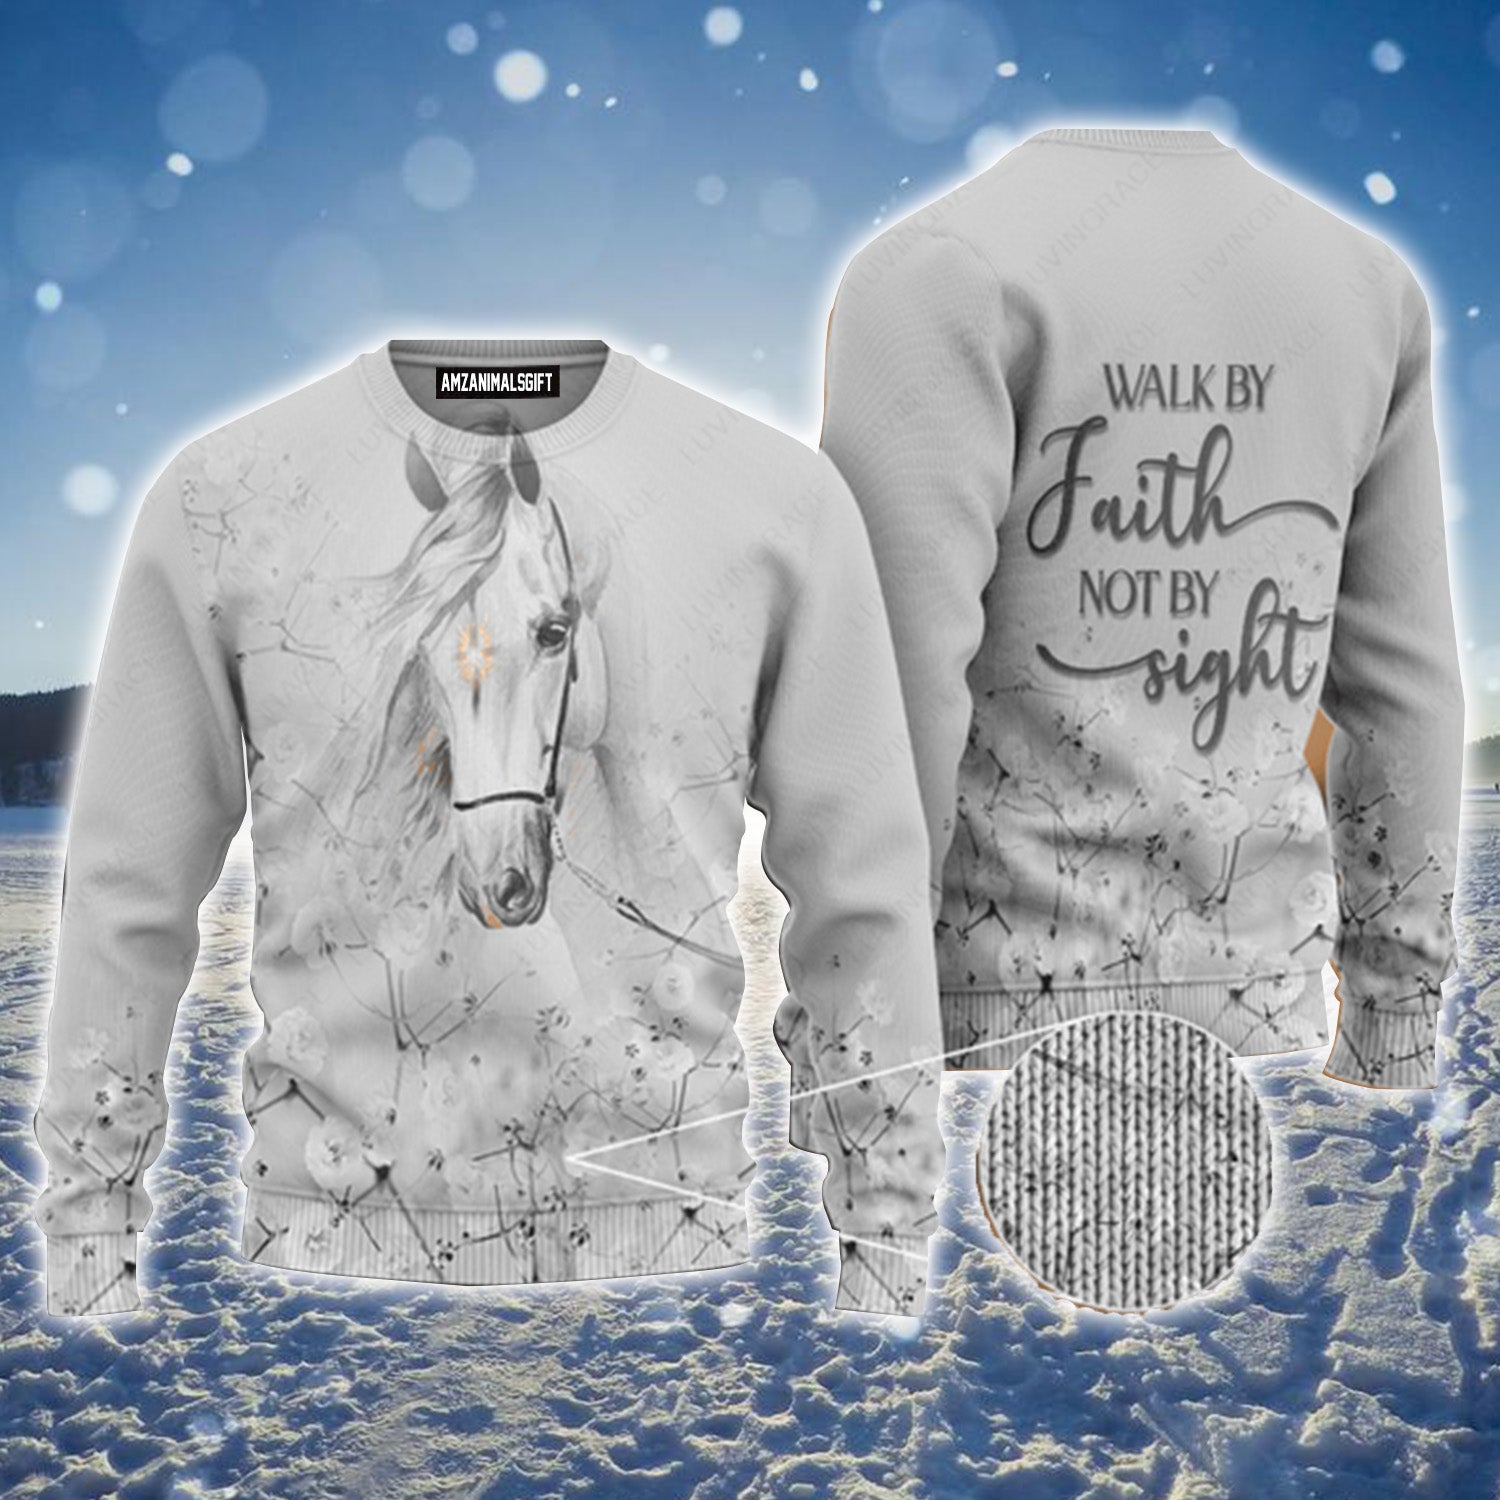 White Flower Cross Horse Walk By Faith Not By Sight Urly Sweater, Christmas Sweater For Men & Women - Perfect Gift For New Year, Winter, Christmas